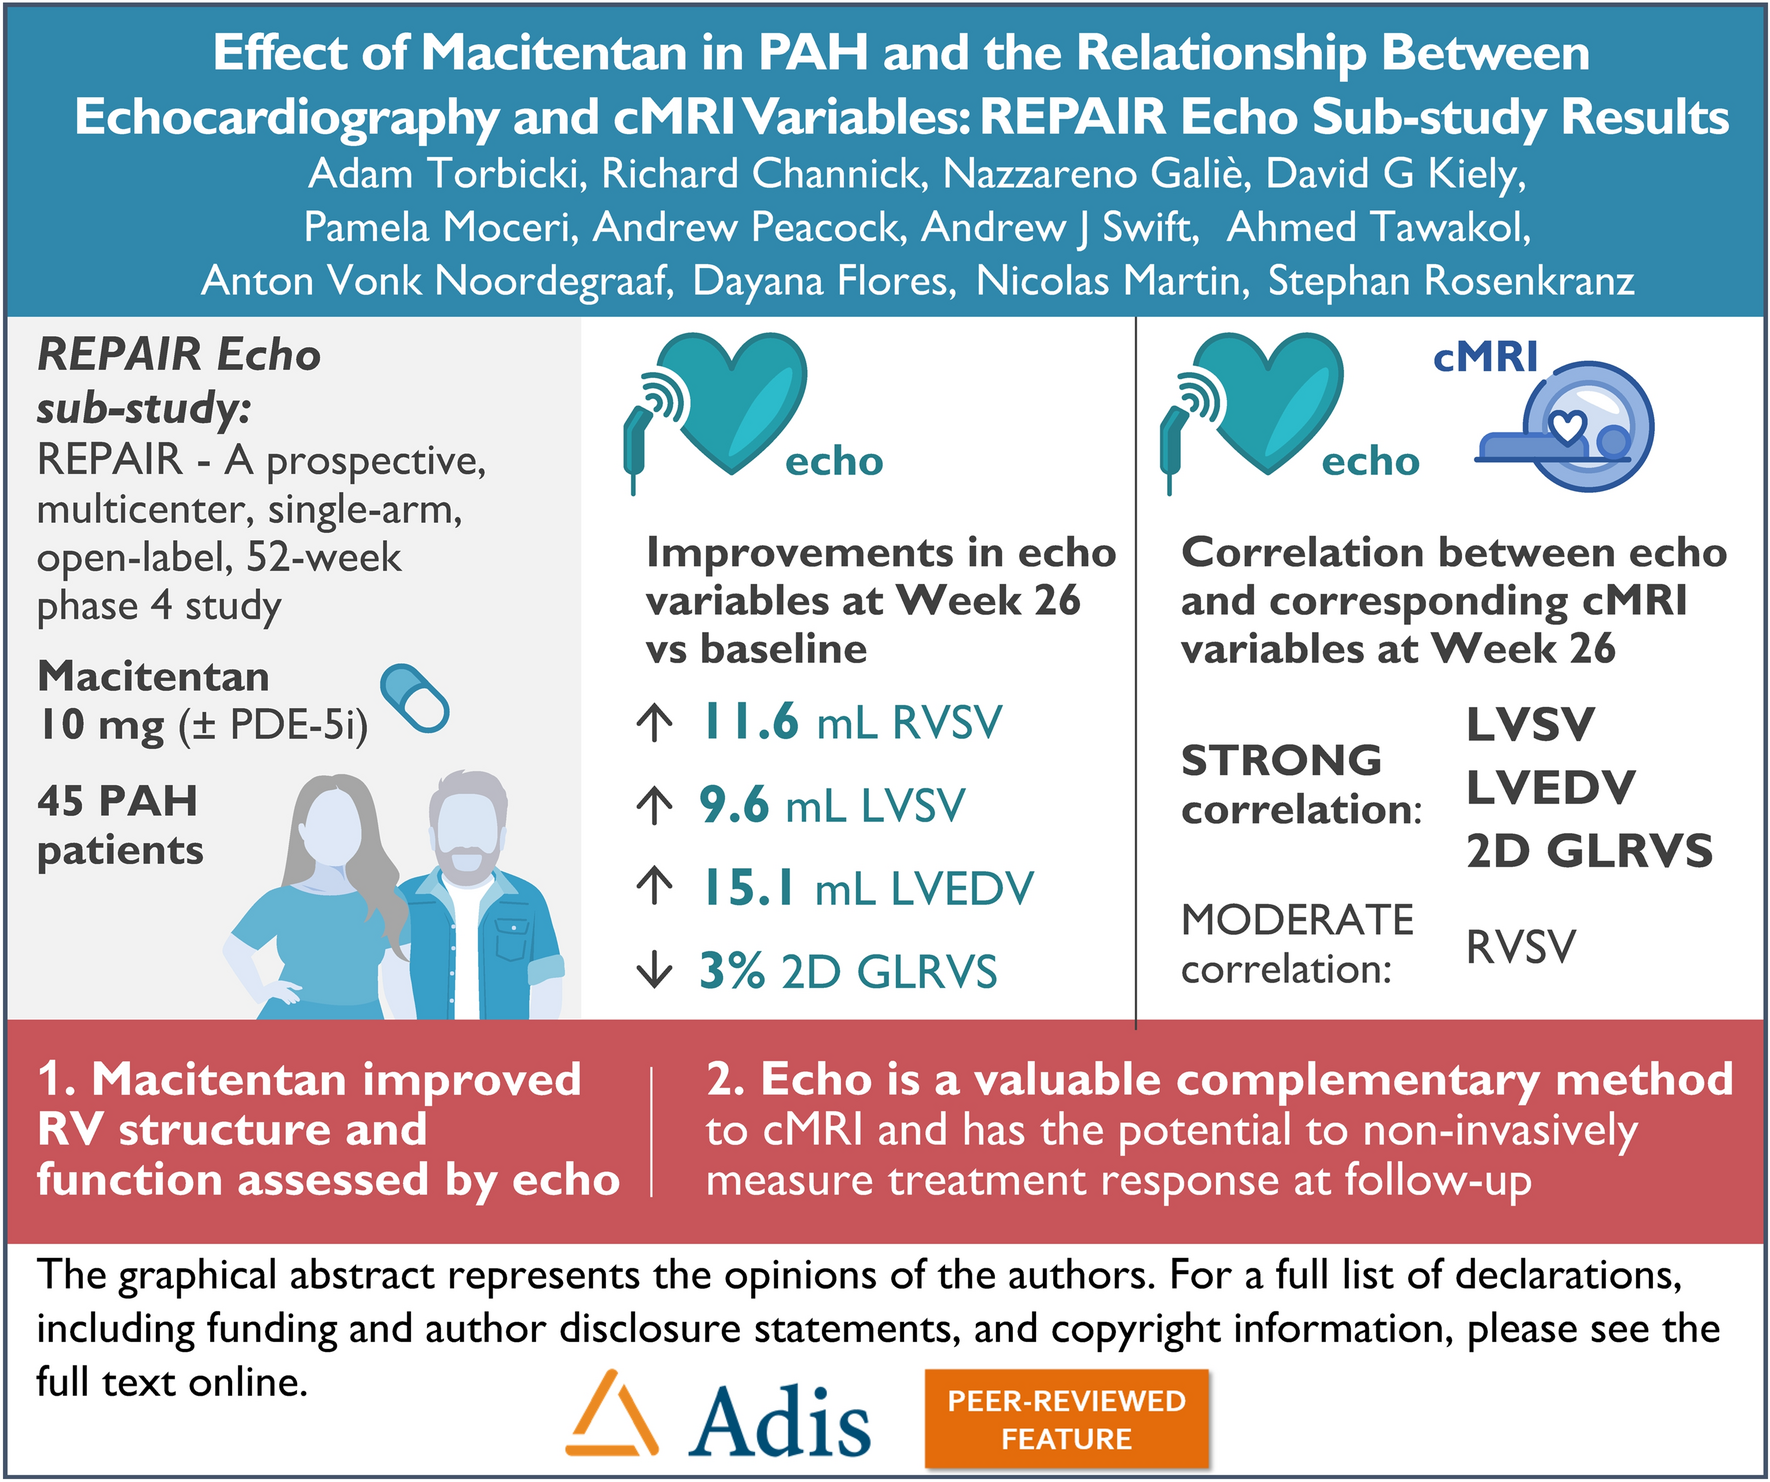 Effect of Macitentan in Pulmonary Arterial Hypertension and the Relationship Between Echocardiography and cMRI Variables: REPAIR Echocardiography Sub-study Results